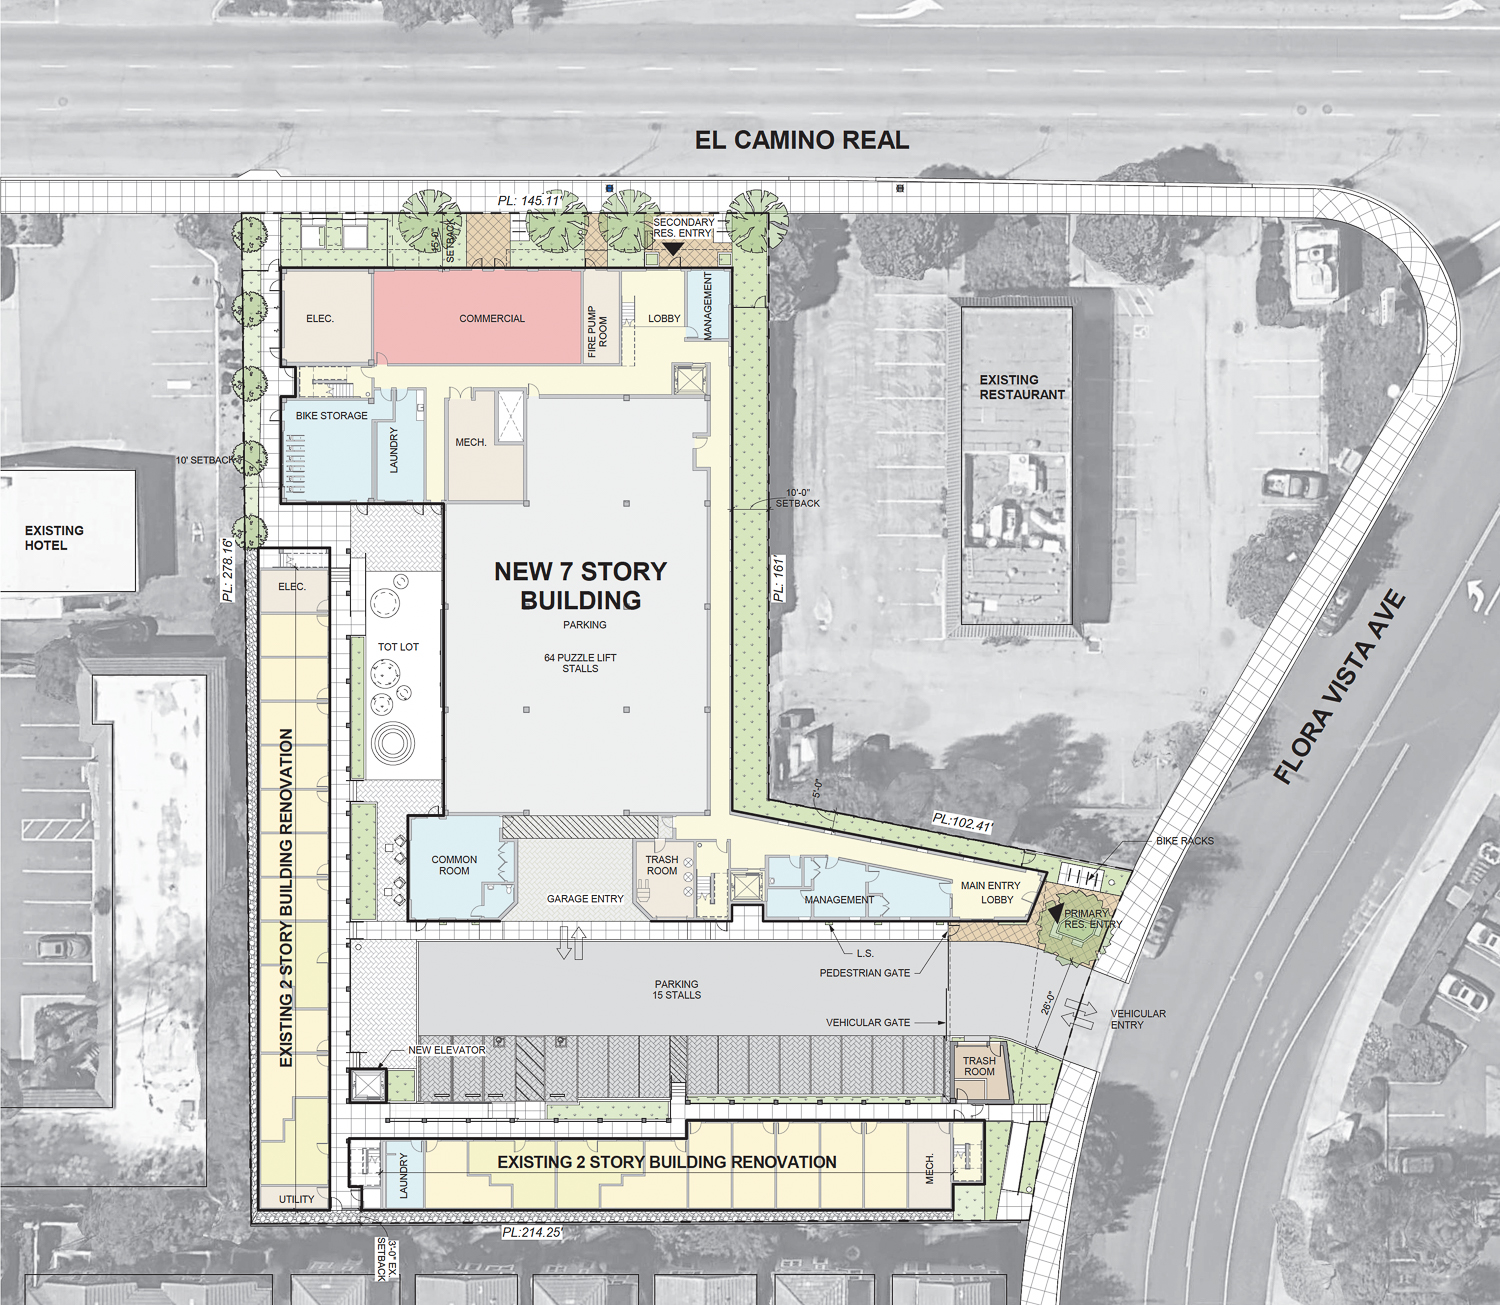 3550 El Camino Real site map showing the new and existing building side-by-side, rendering by VMWP